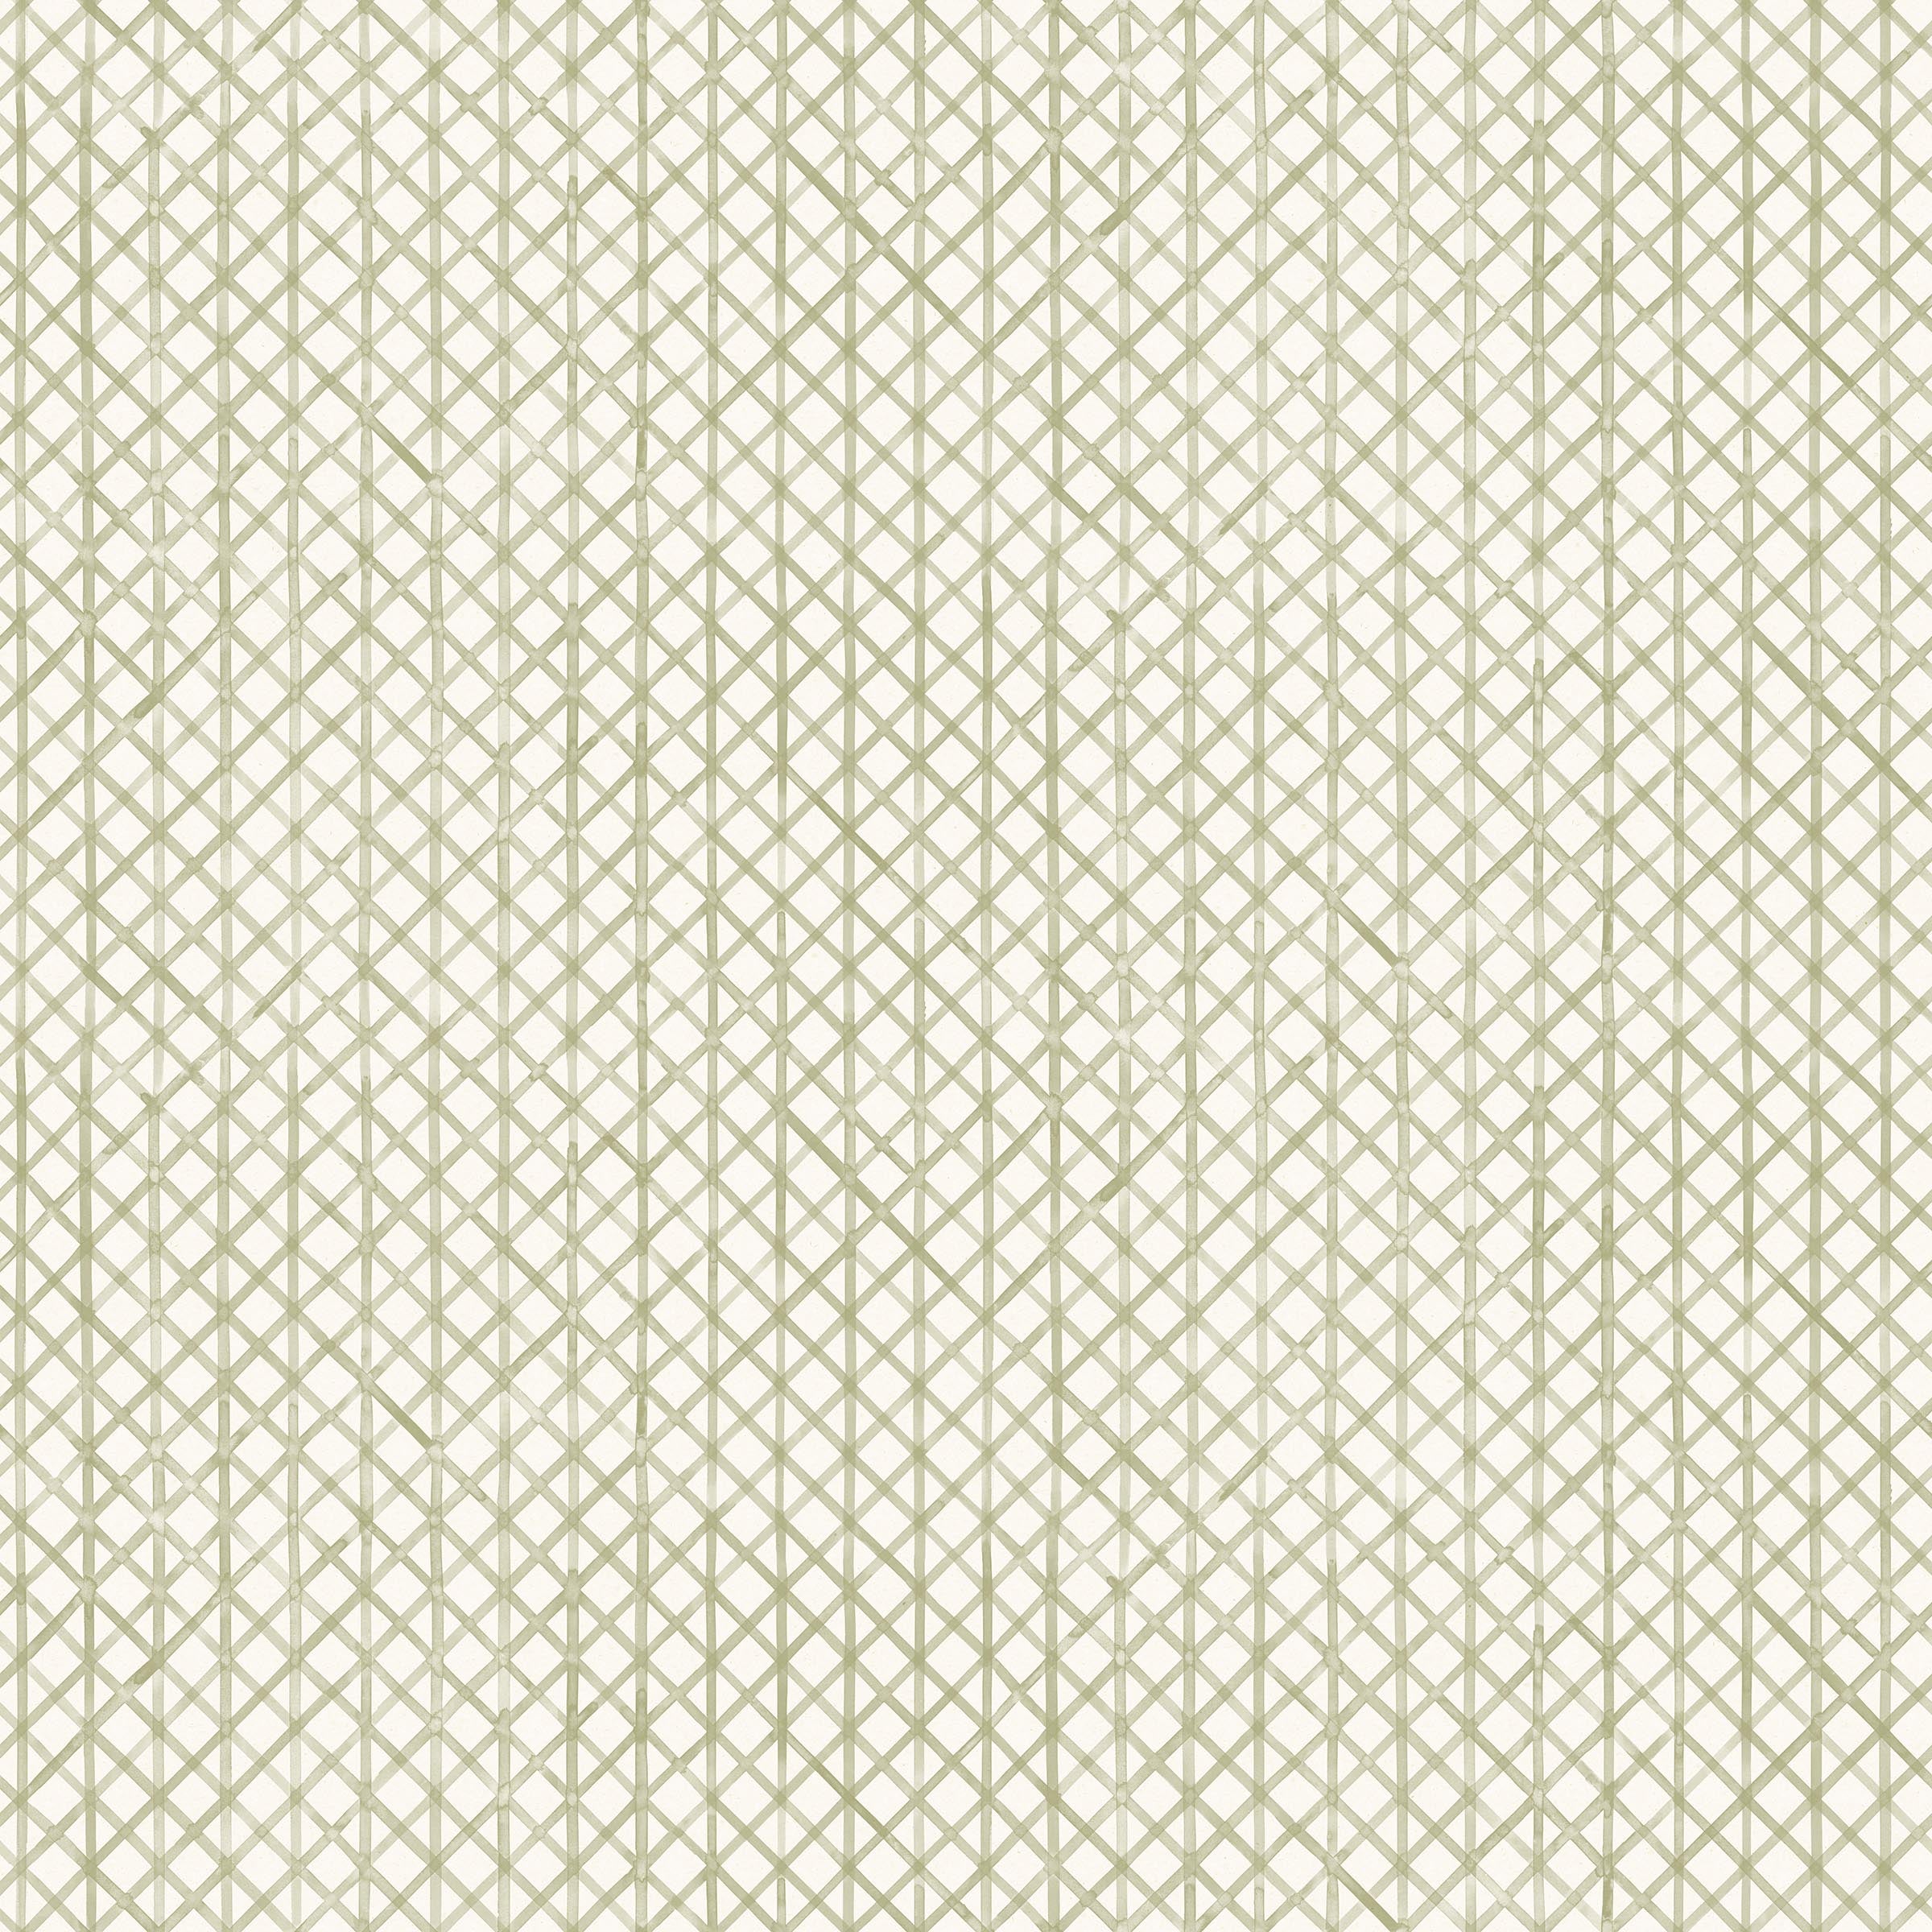 Detail of wallpaper in an intricate striped grid pattern in sage on a white field.